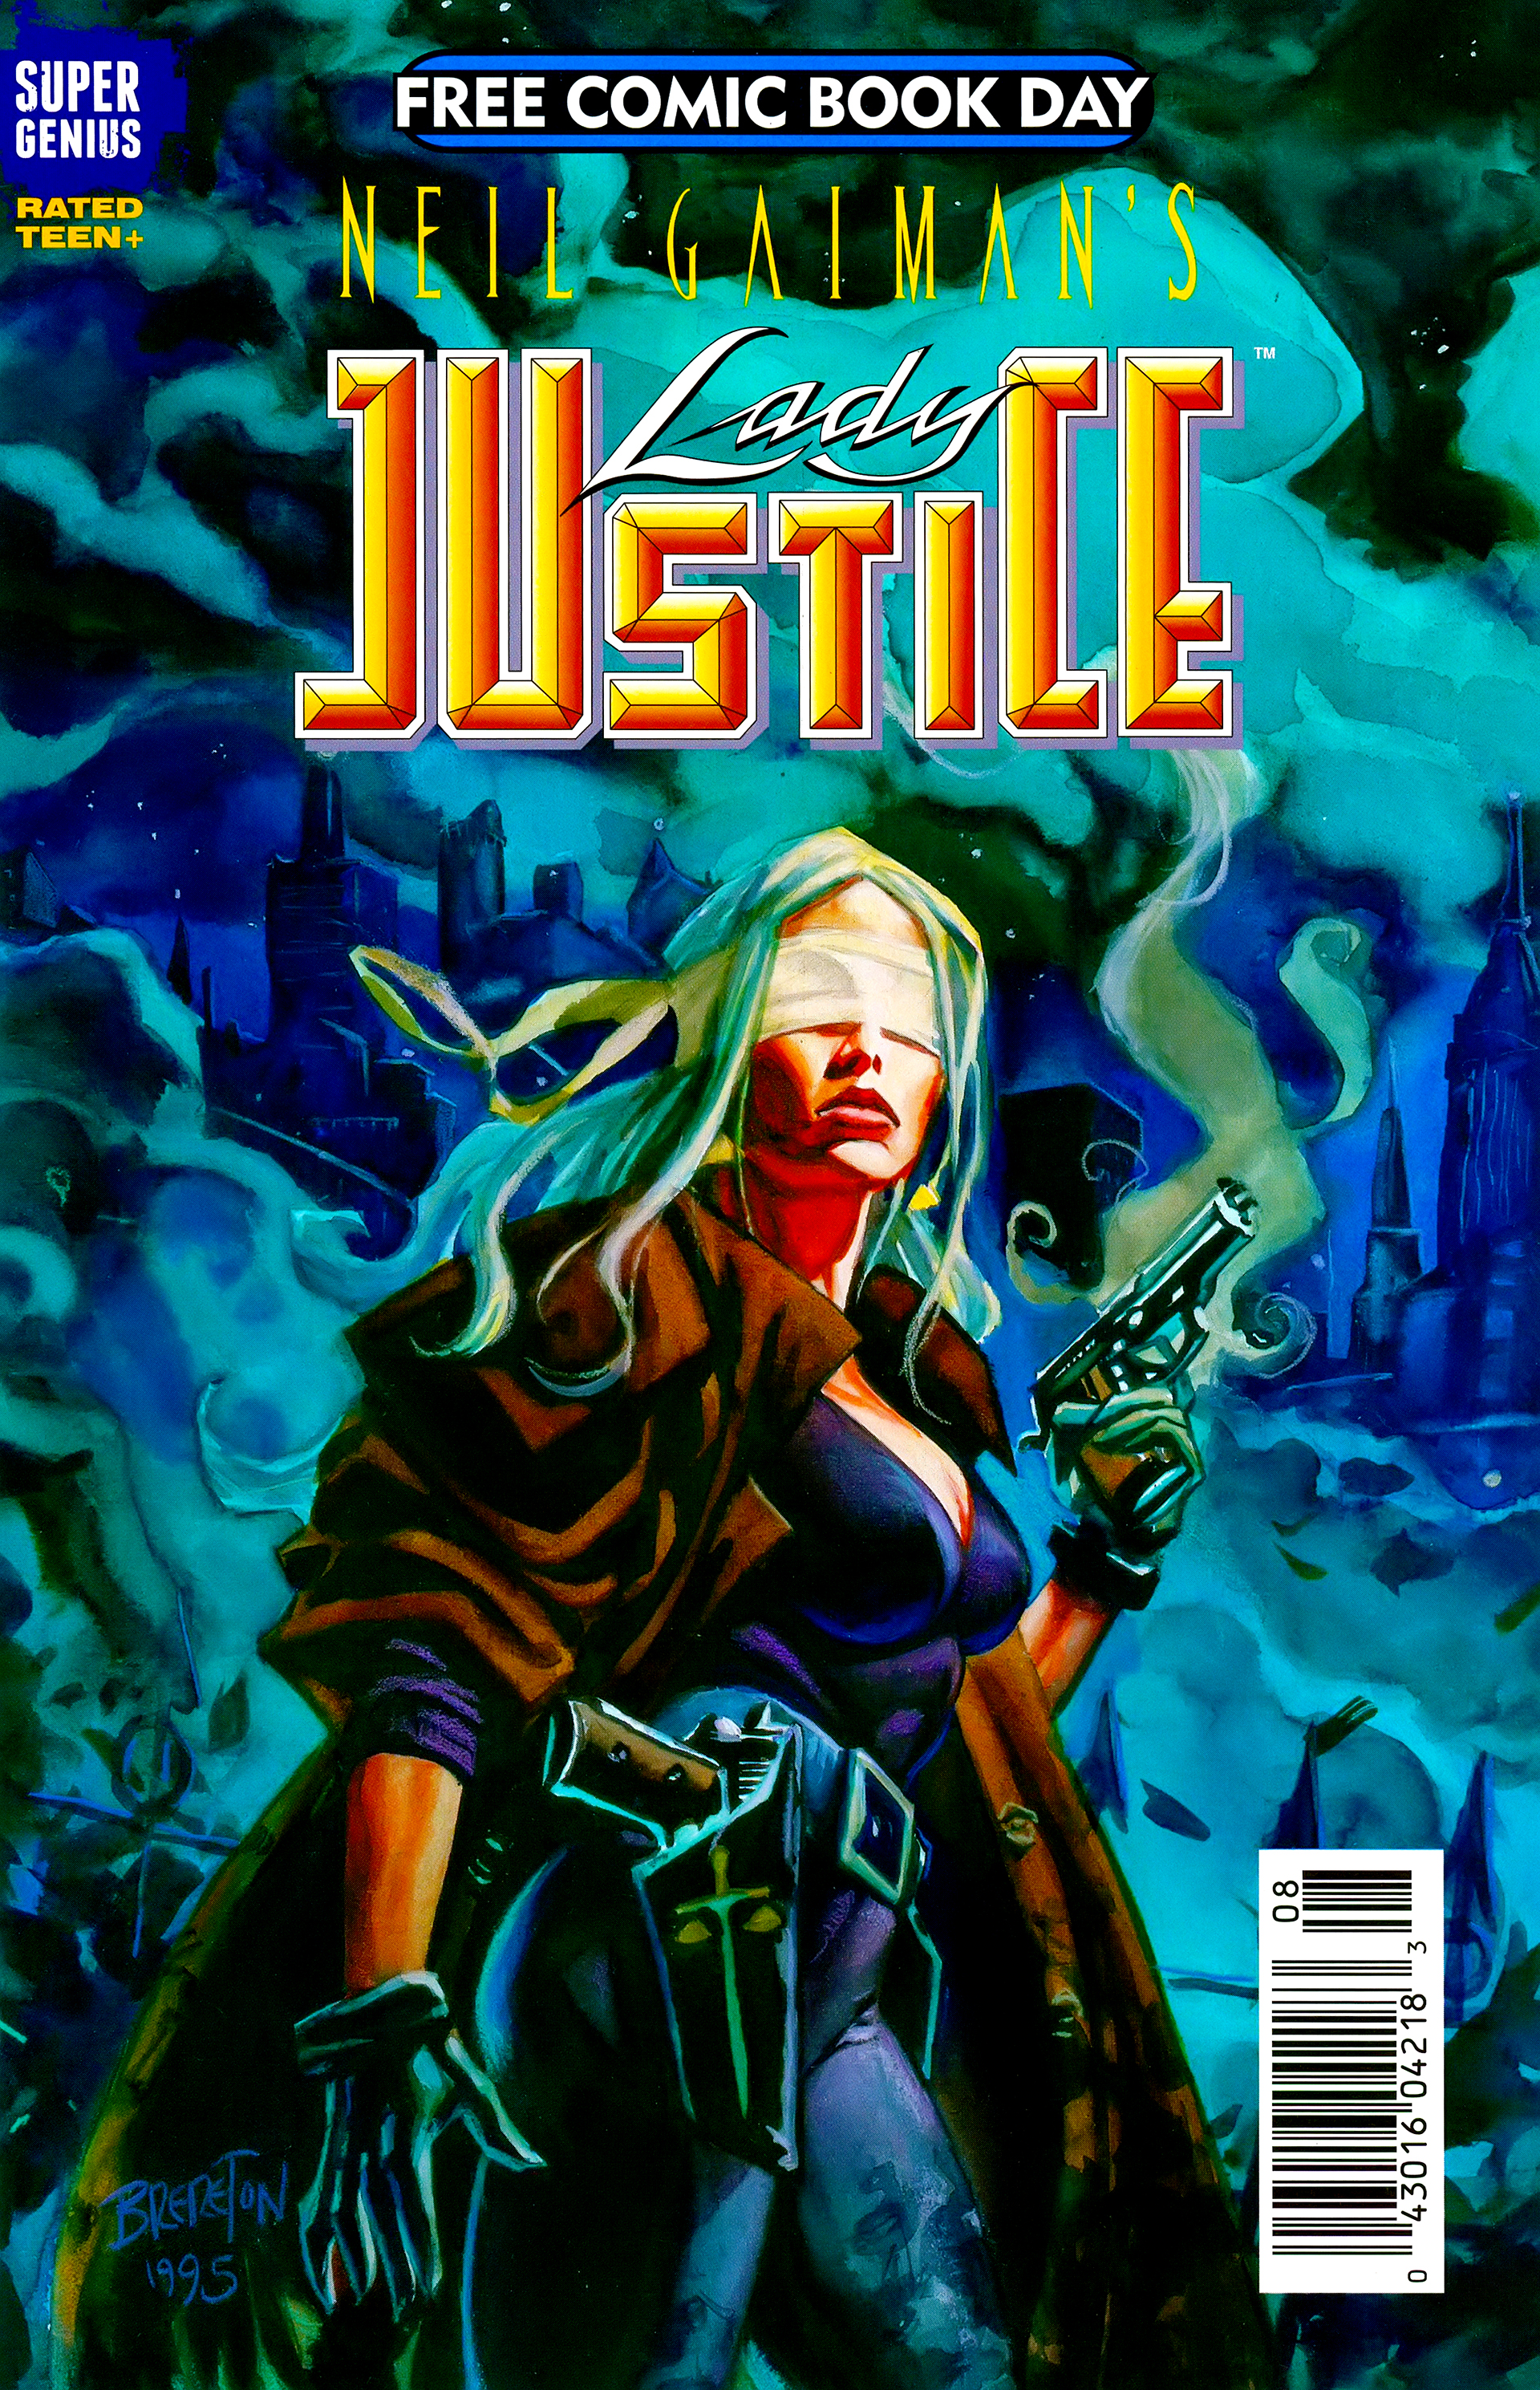 Read online Free Comic Book Day 2015 comic -  Issue # Neil Gaiman's Lady Justice - 1